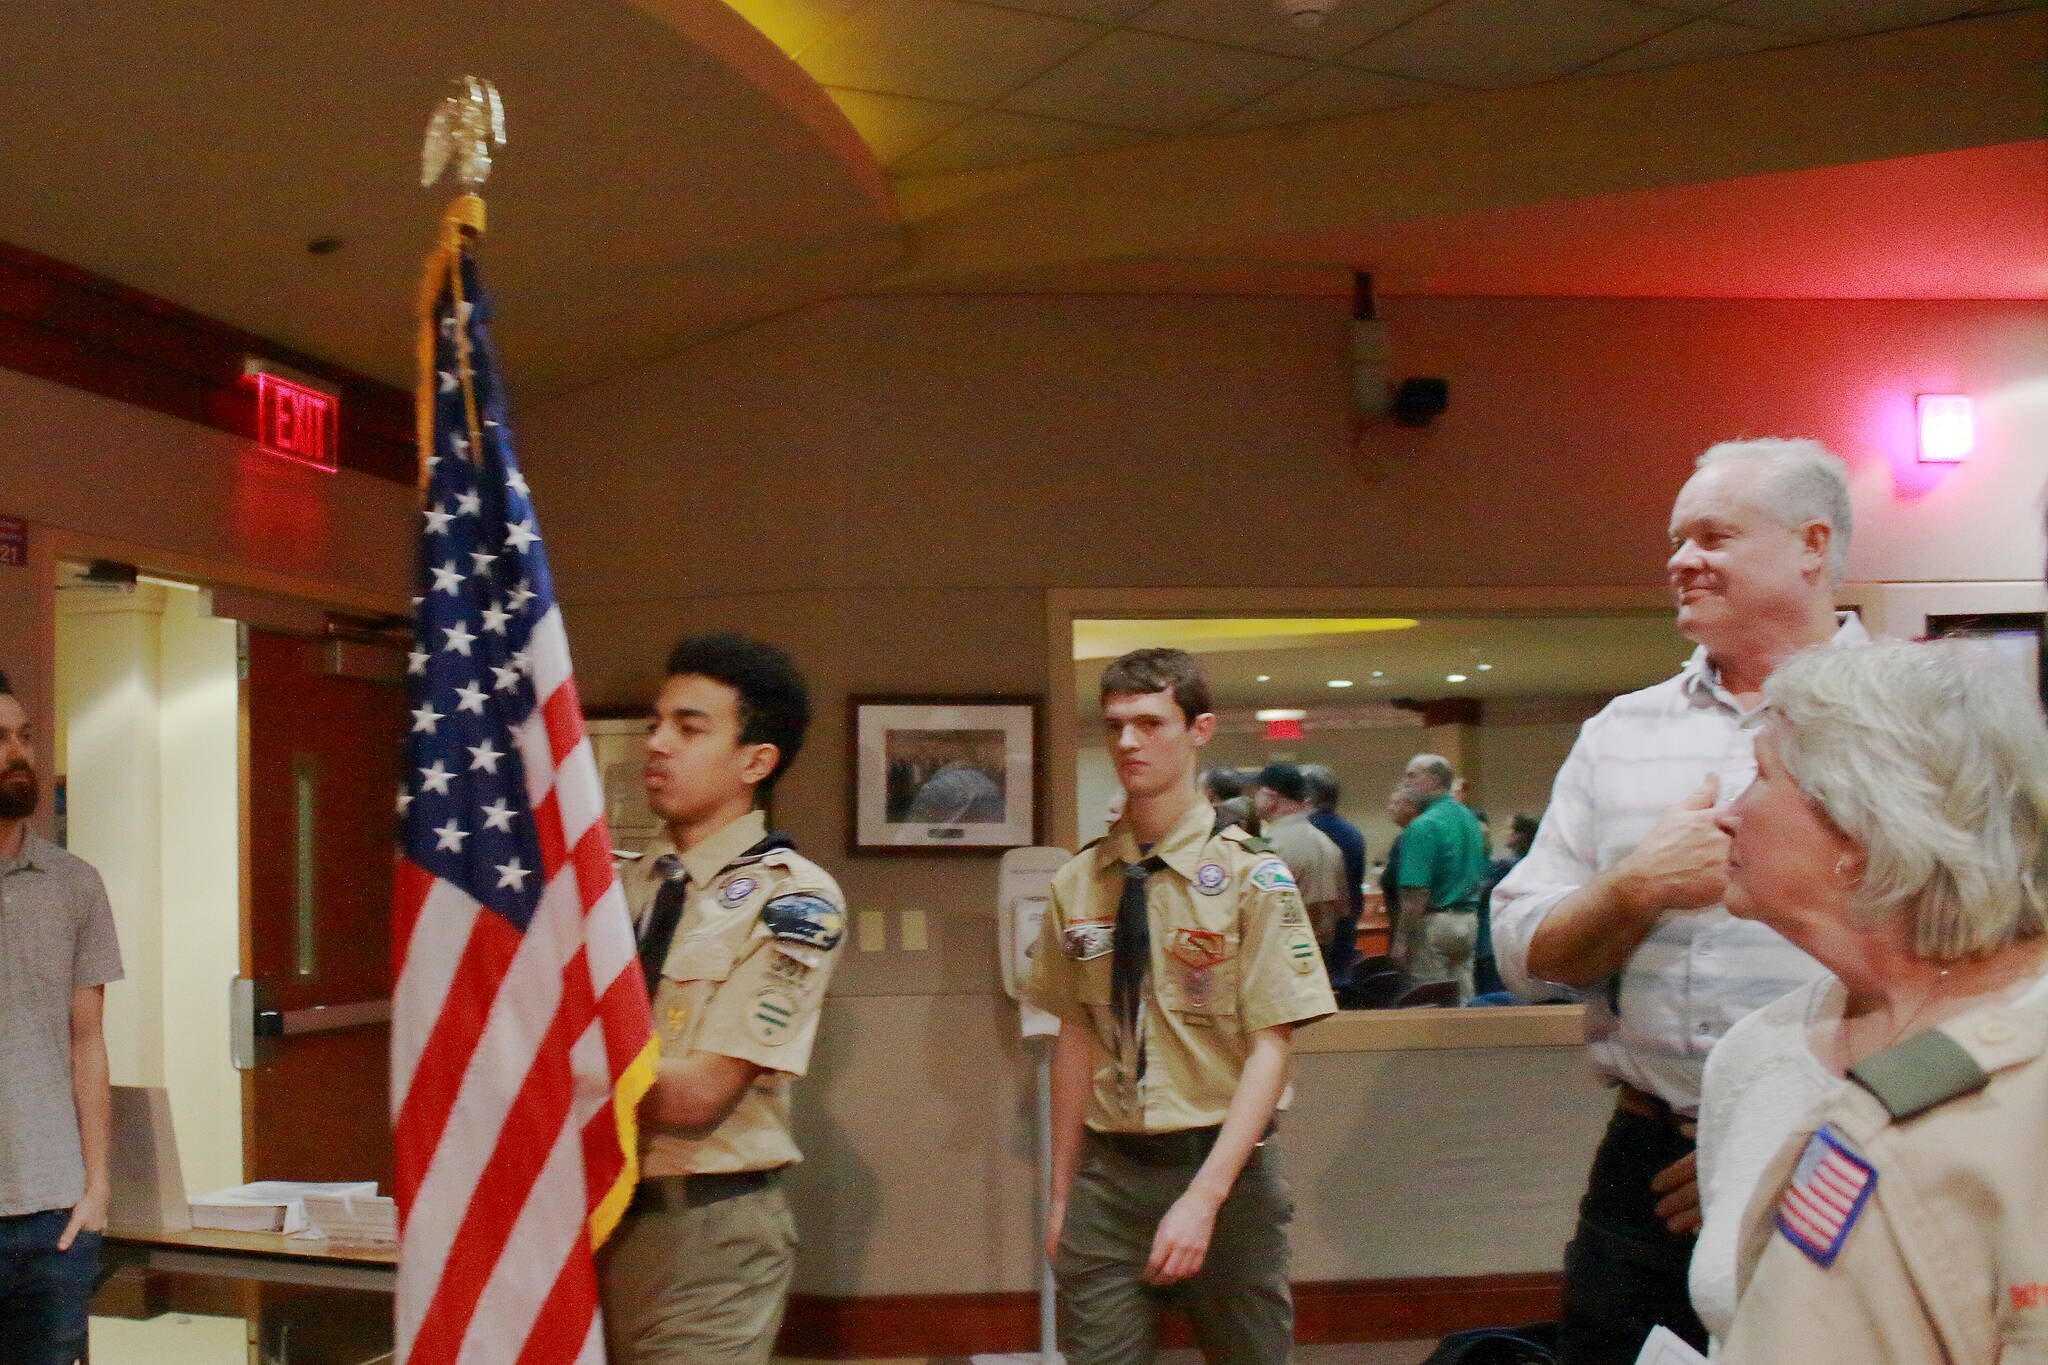 Photo by Keelin Everly-Lang / The Mirror
Boy Scouts present the colors at the Federal Way City Council meeting on Dec. 5.